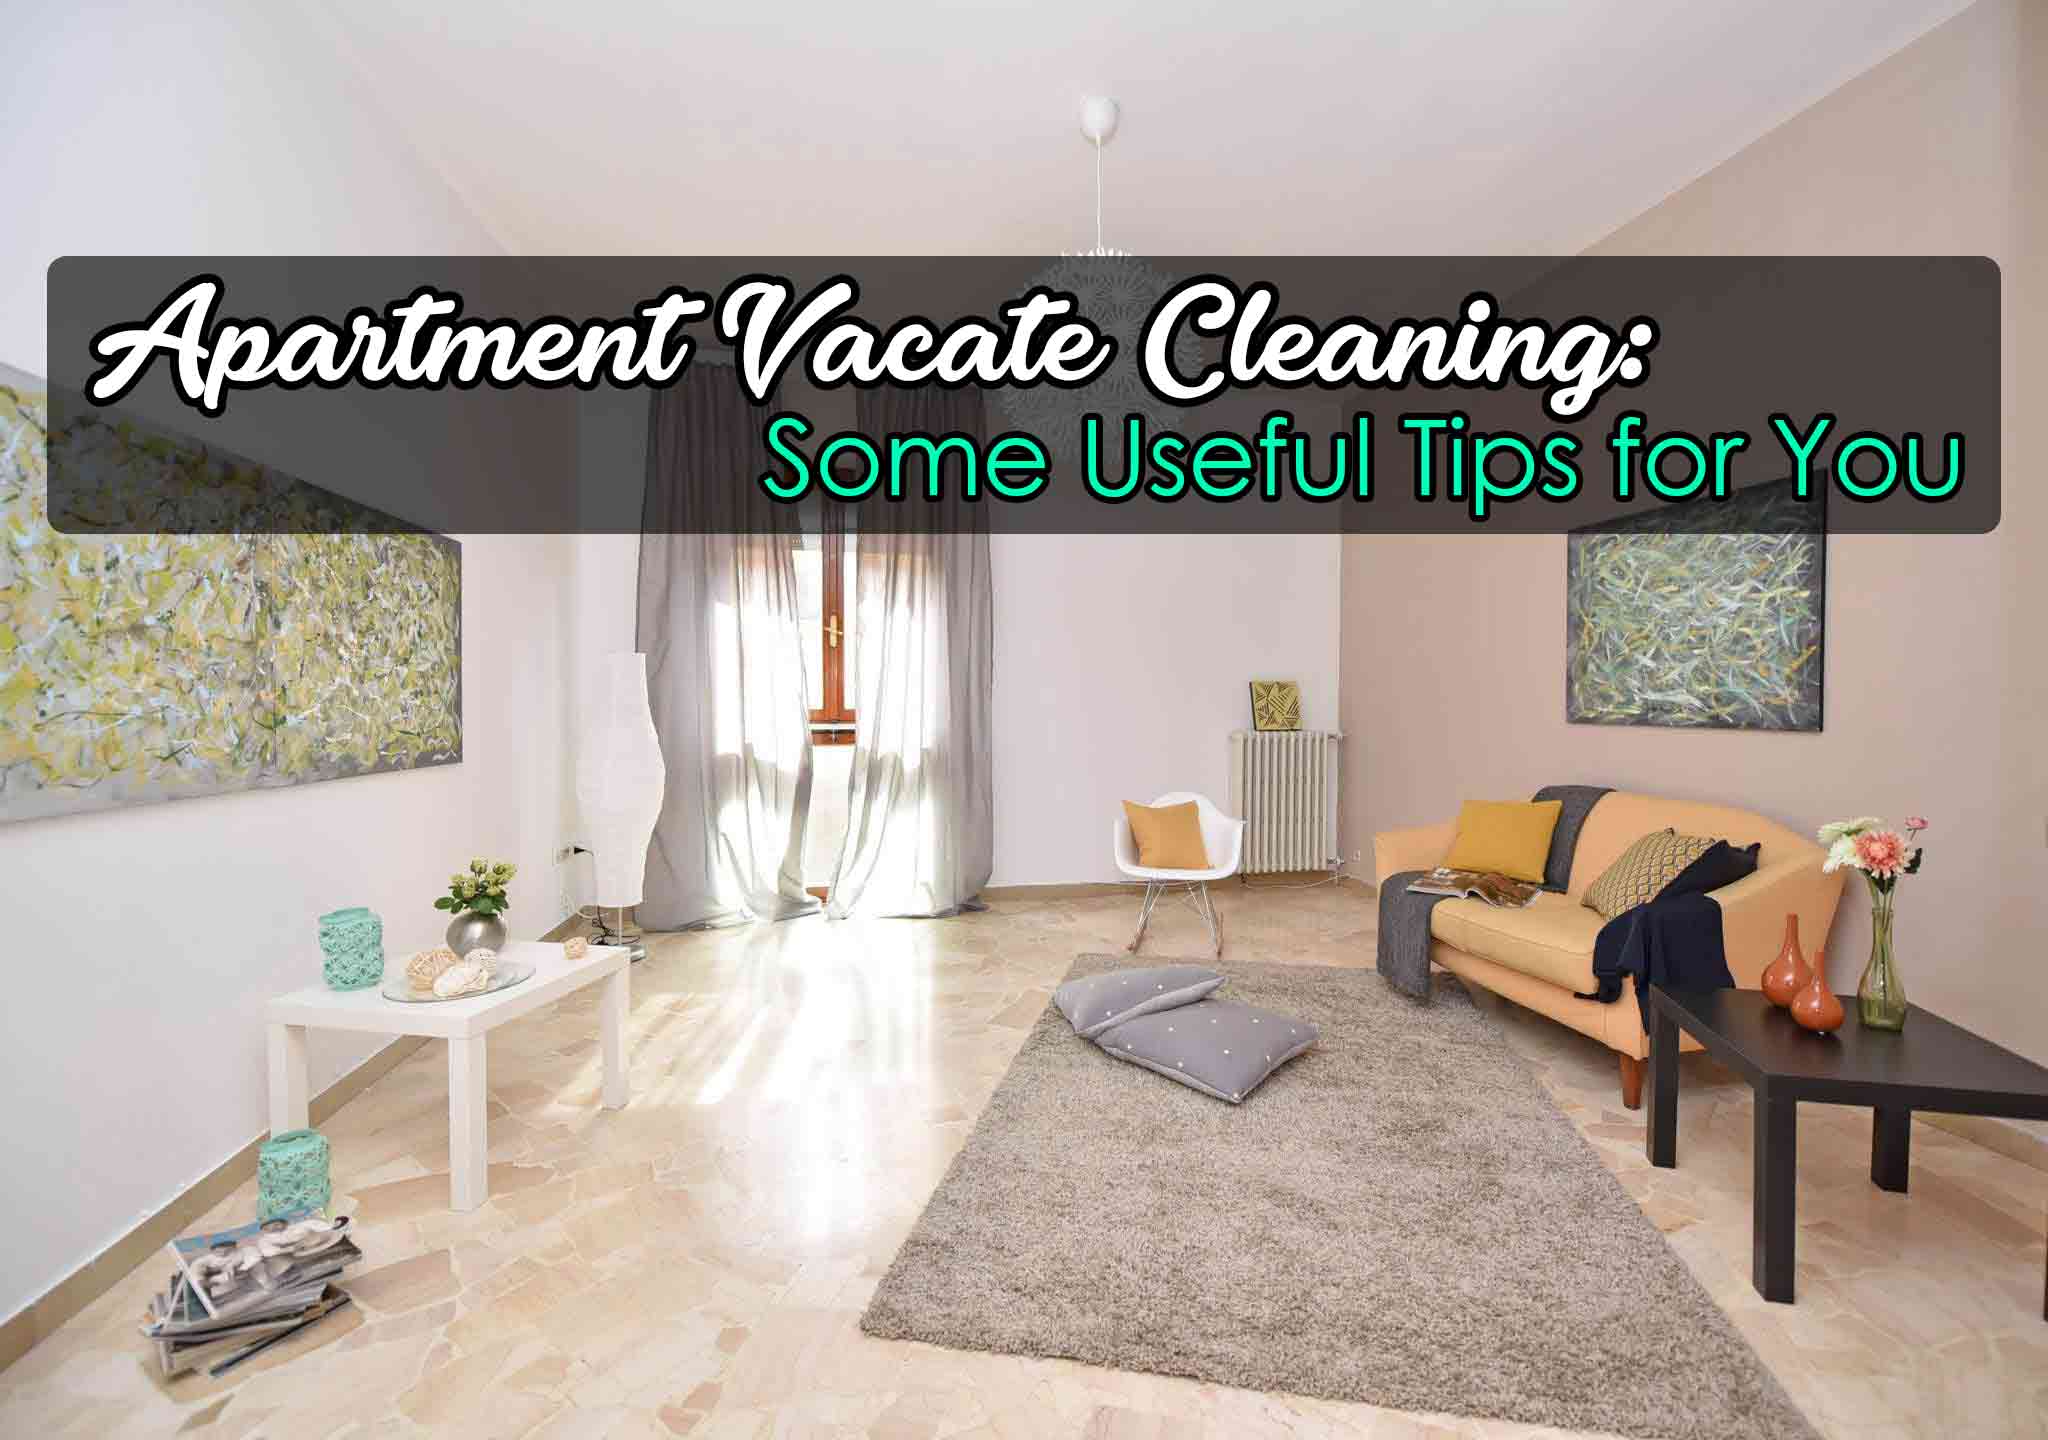 Apartment Vacate Cleaning: Some Useful Tips for You